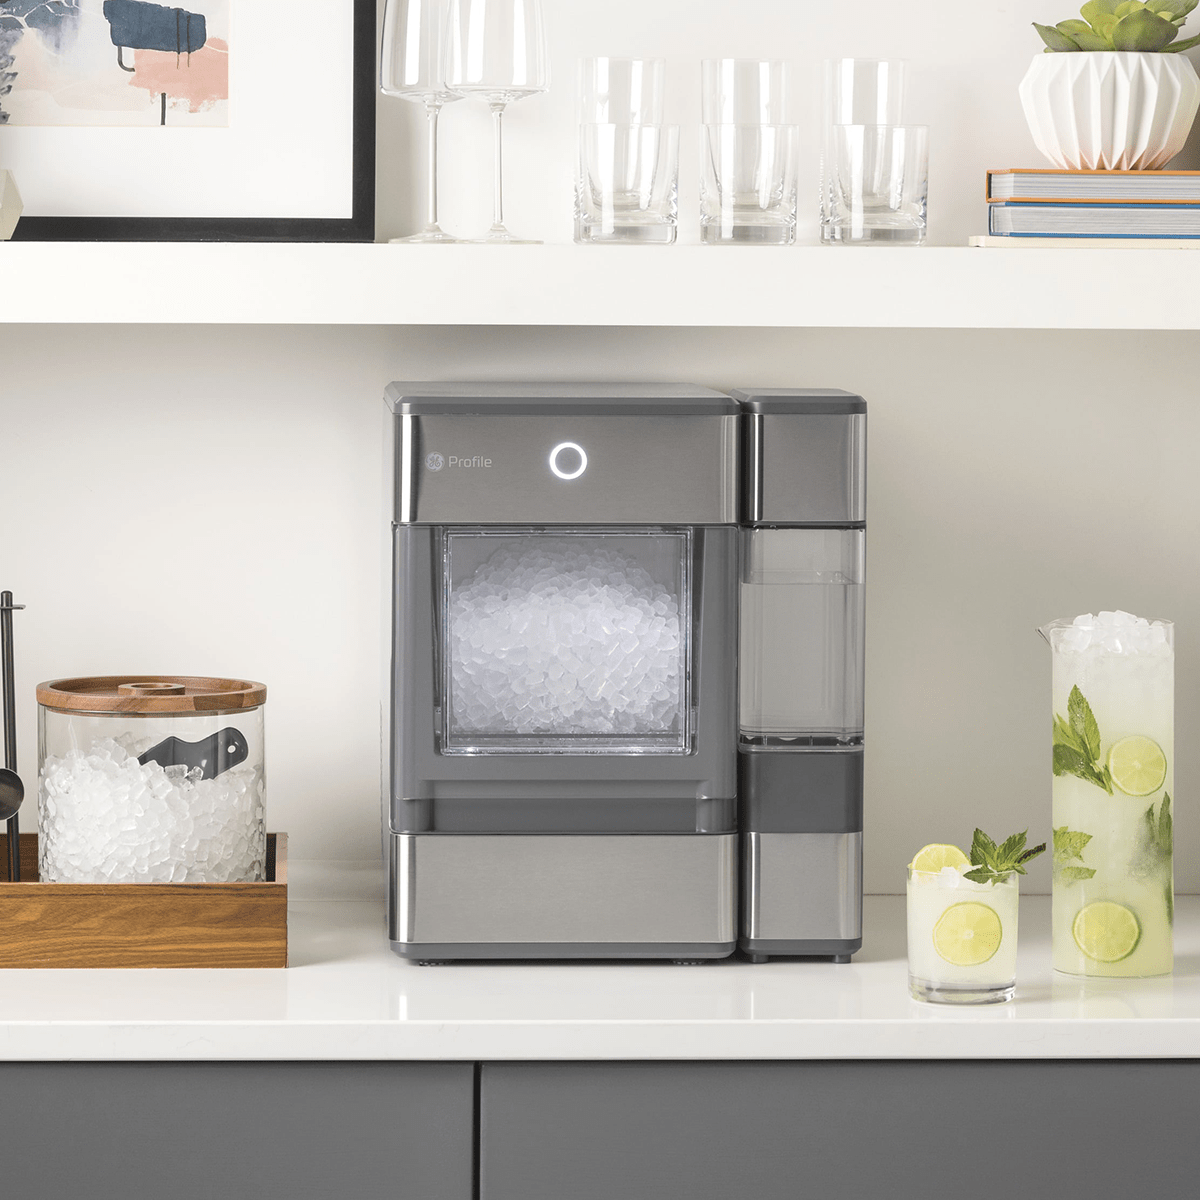 Walmart Prime Day Deals for Kitchen and Home | Taste of Home